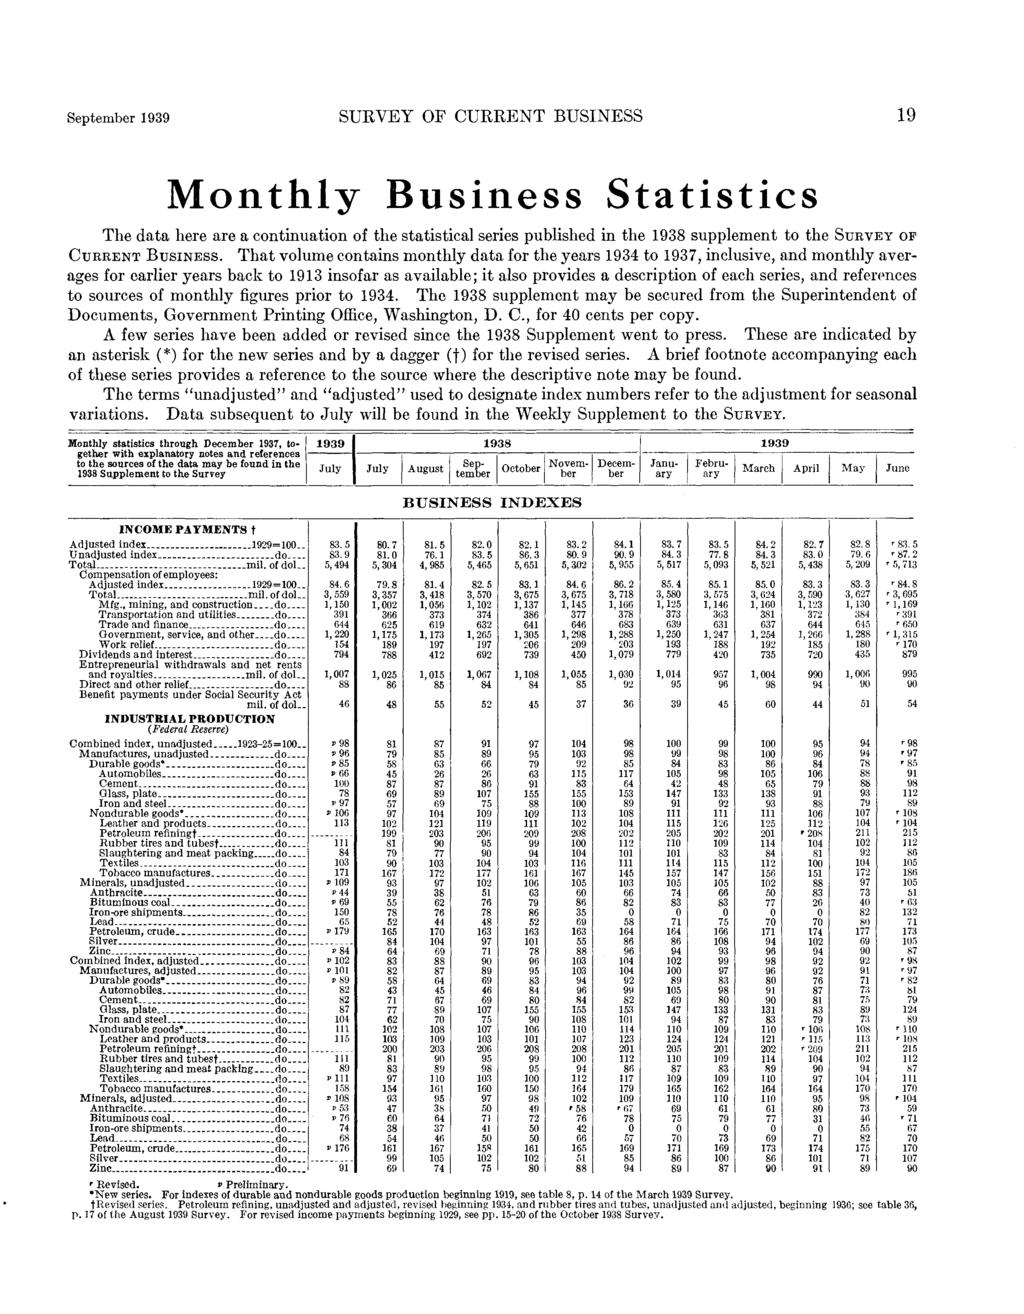 SURVEY OF CURRENT BUSINESS 19 Monthly Business Statistics The data here are a continuation of the statistical series published in the supplement to the SURVEY OF CURRENT BUSINESS.